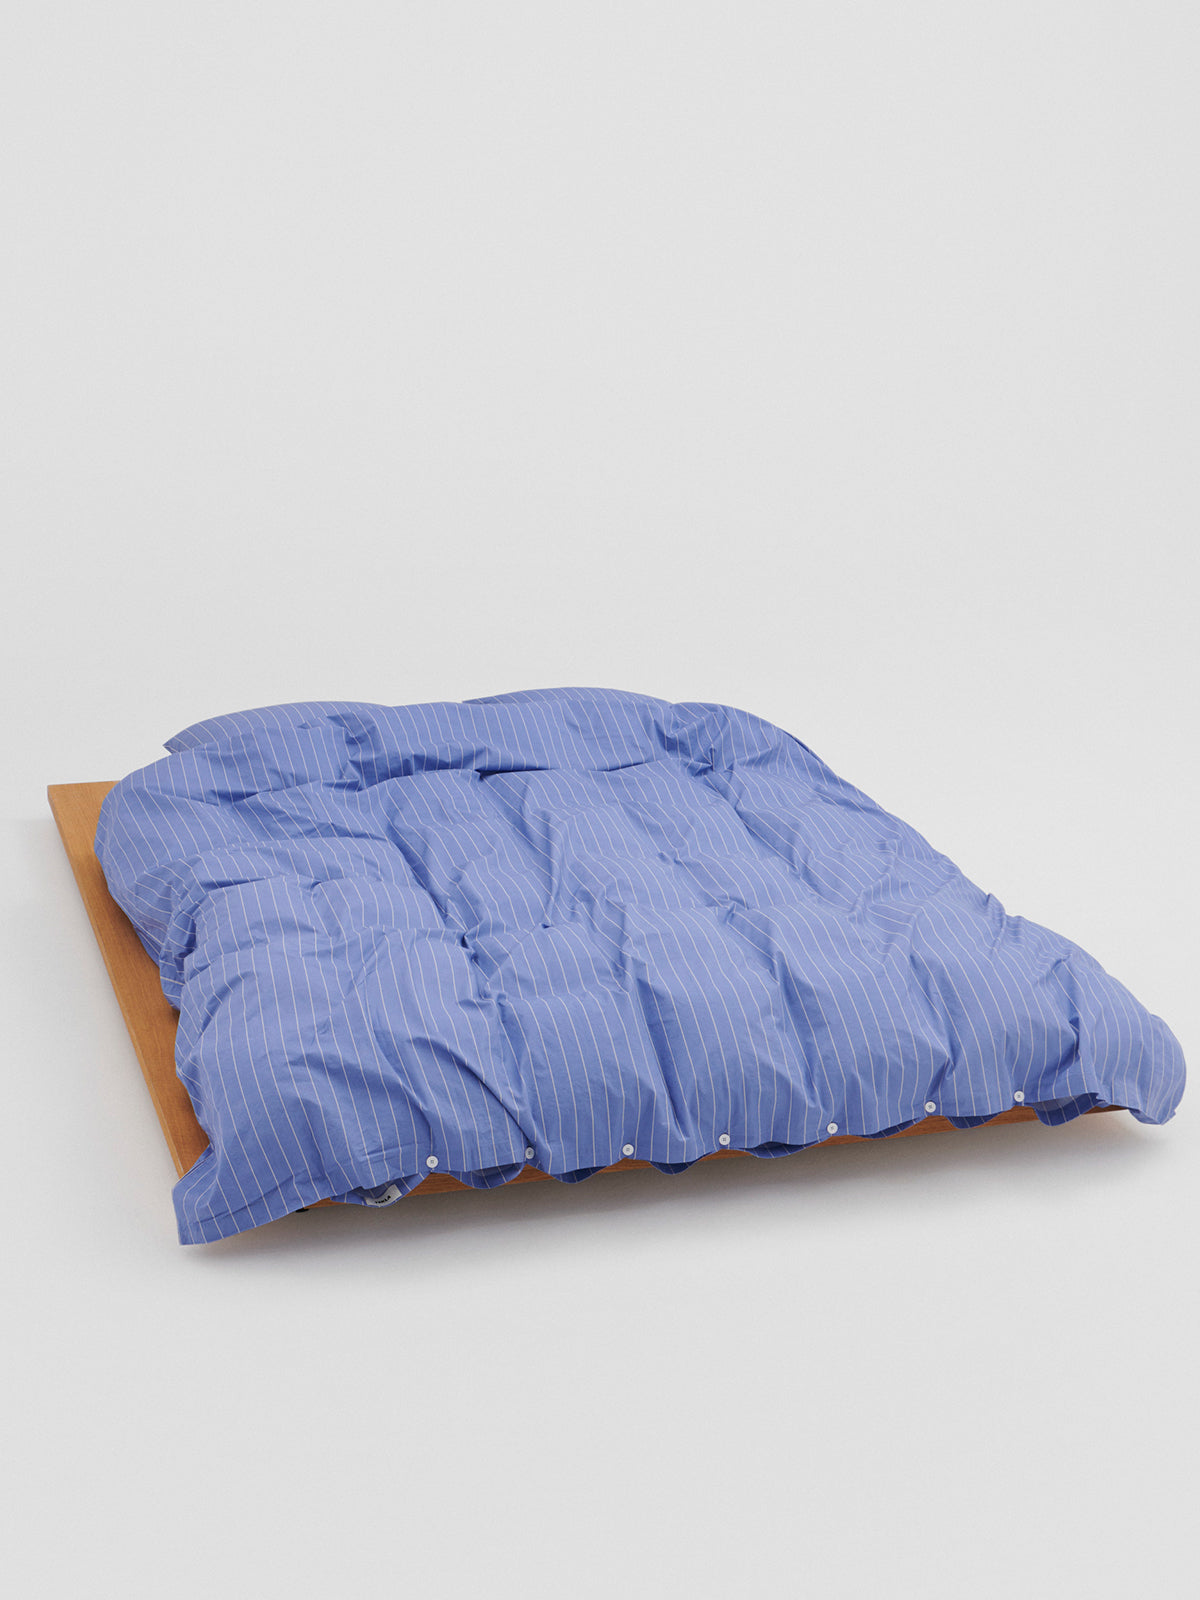 Tekla - Percale Duvet Cover in Clear Blue Stripes